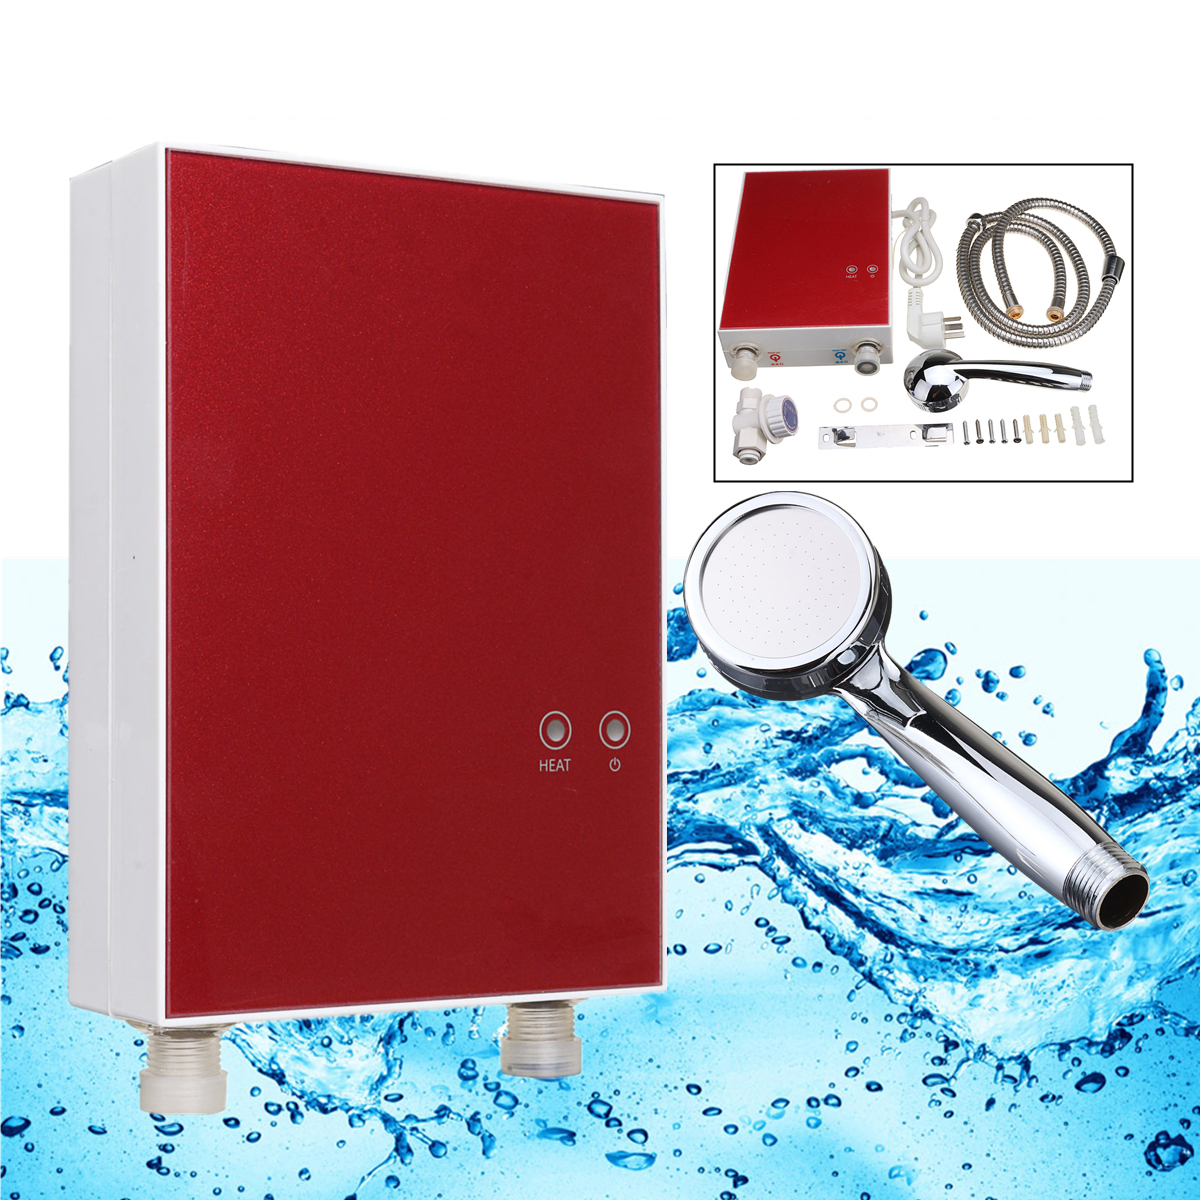 

3500W 220V Tankless Instant Hot Water Heater Kitchen Electric Hot Water System